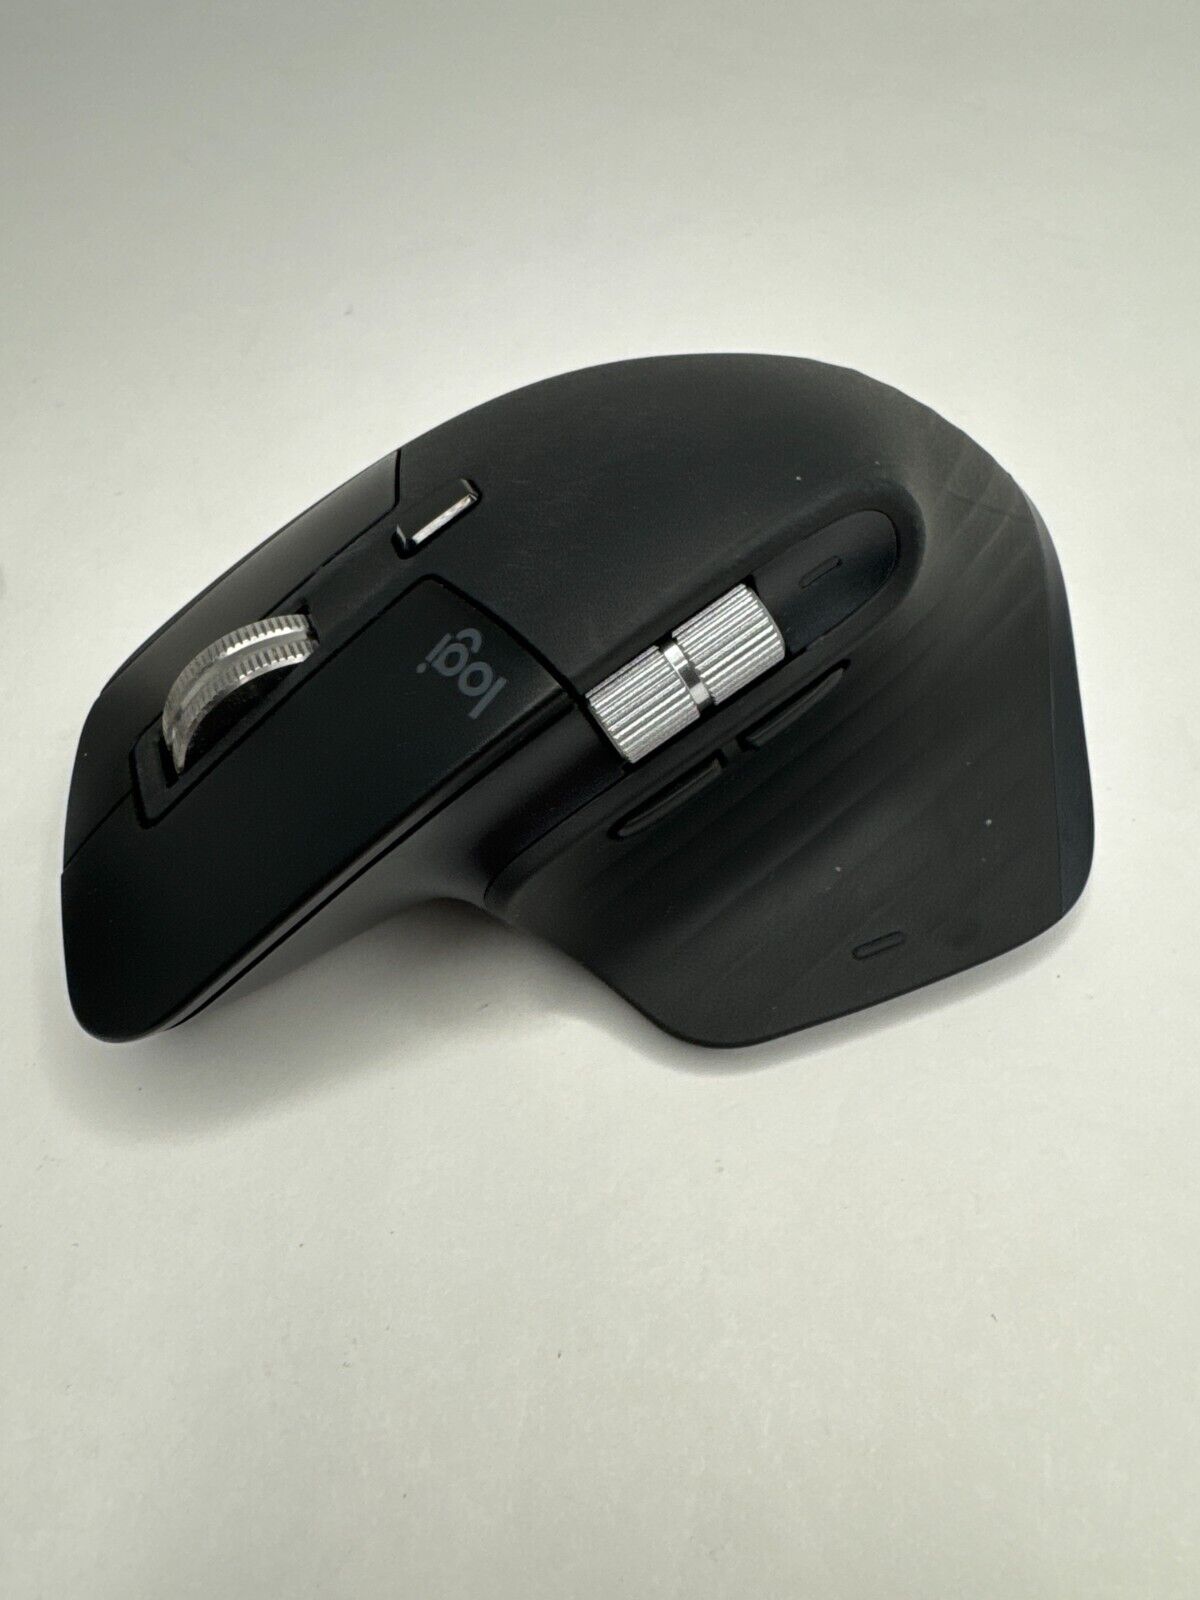 Logitech MX Master 3 Bluetooth Wireless Mouse for Mac - Black/Silver used (READ)